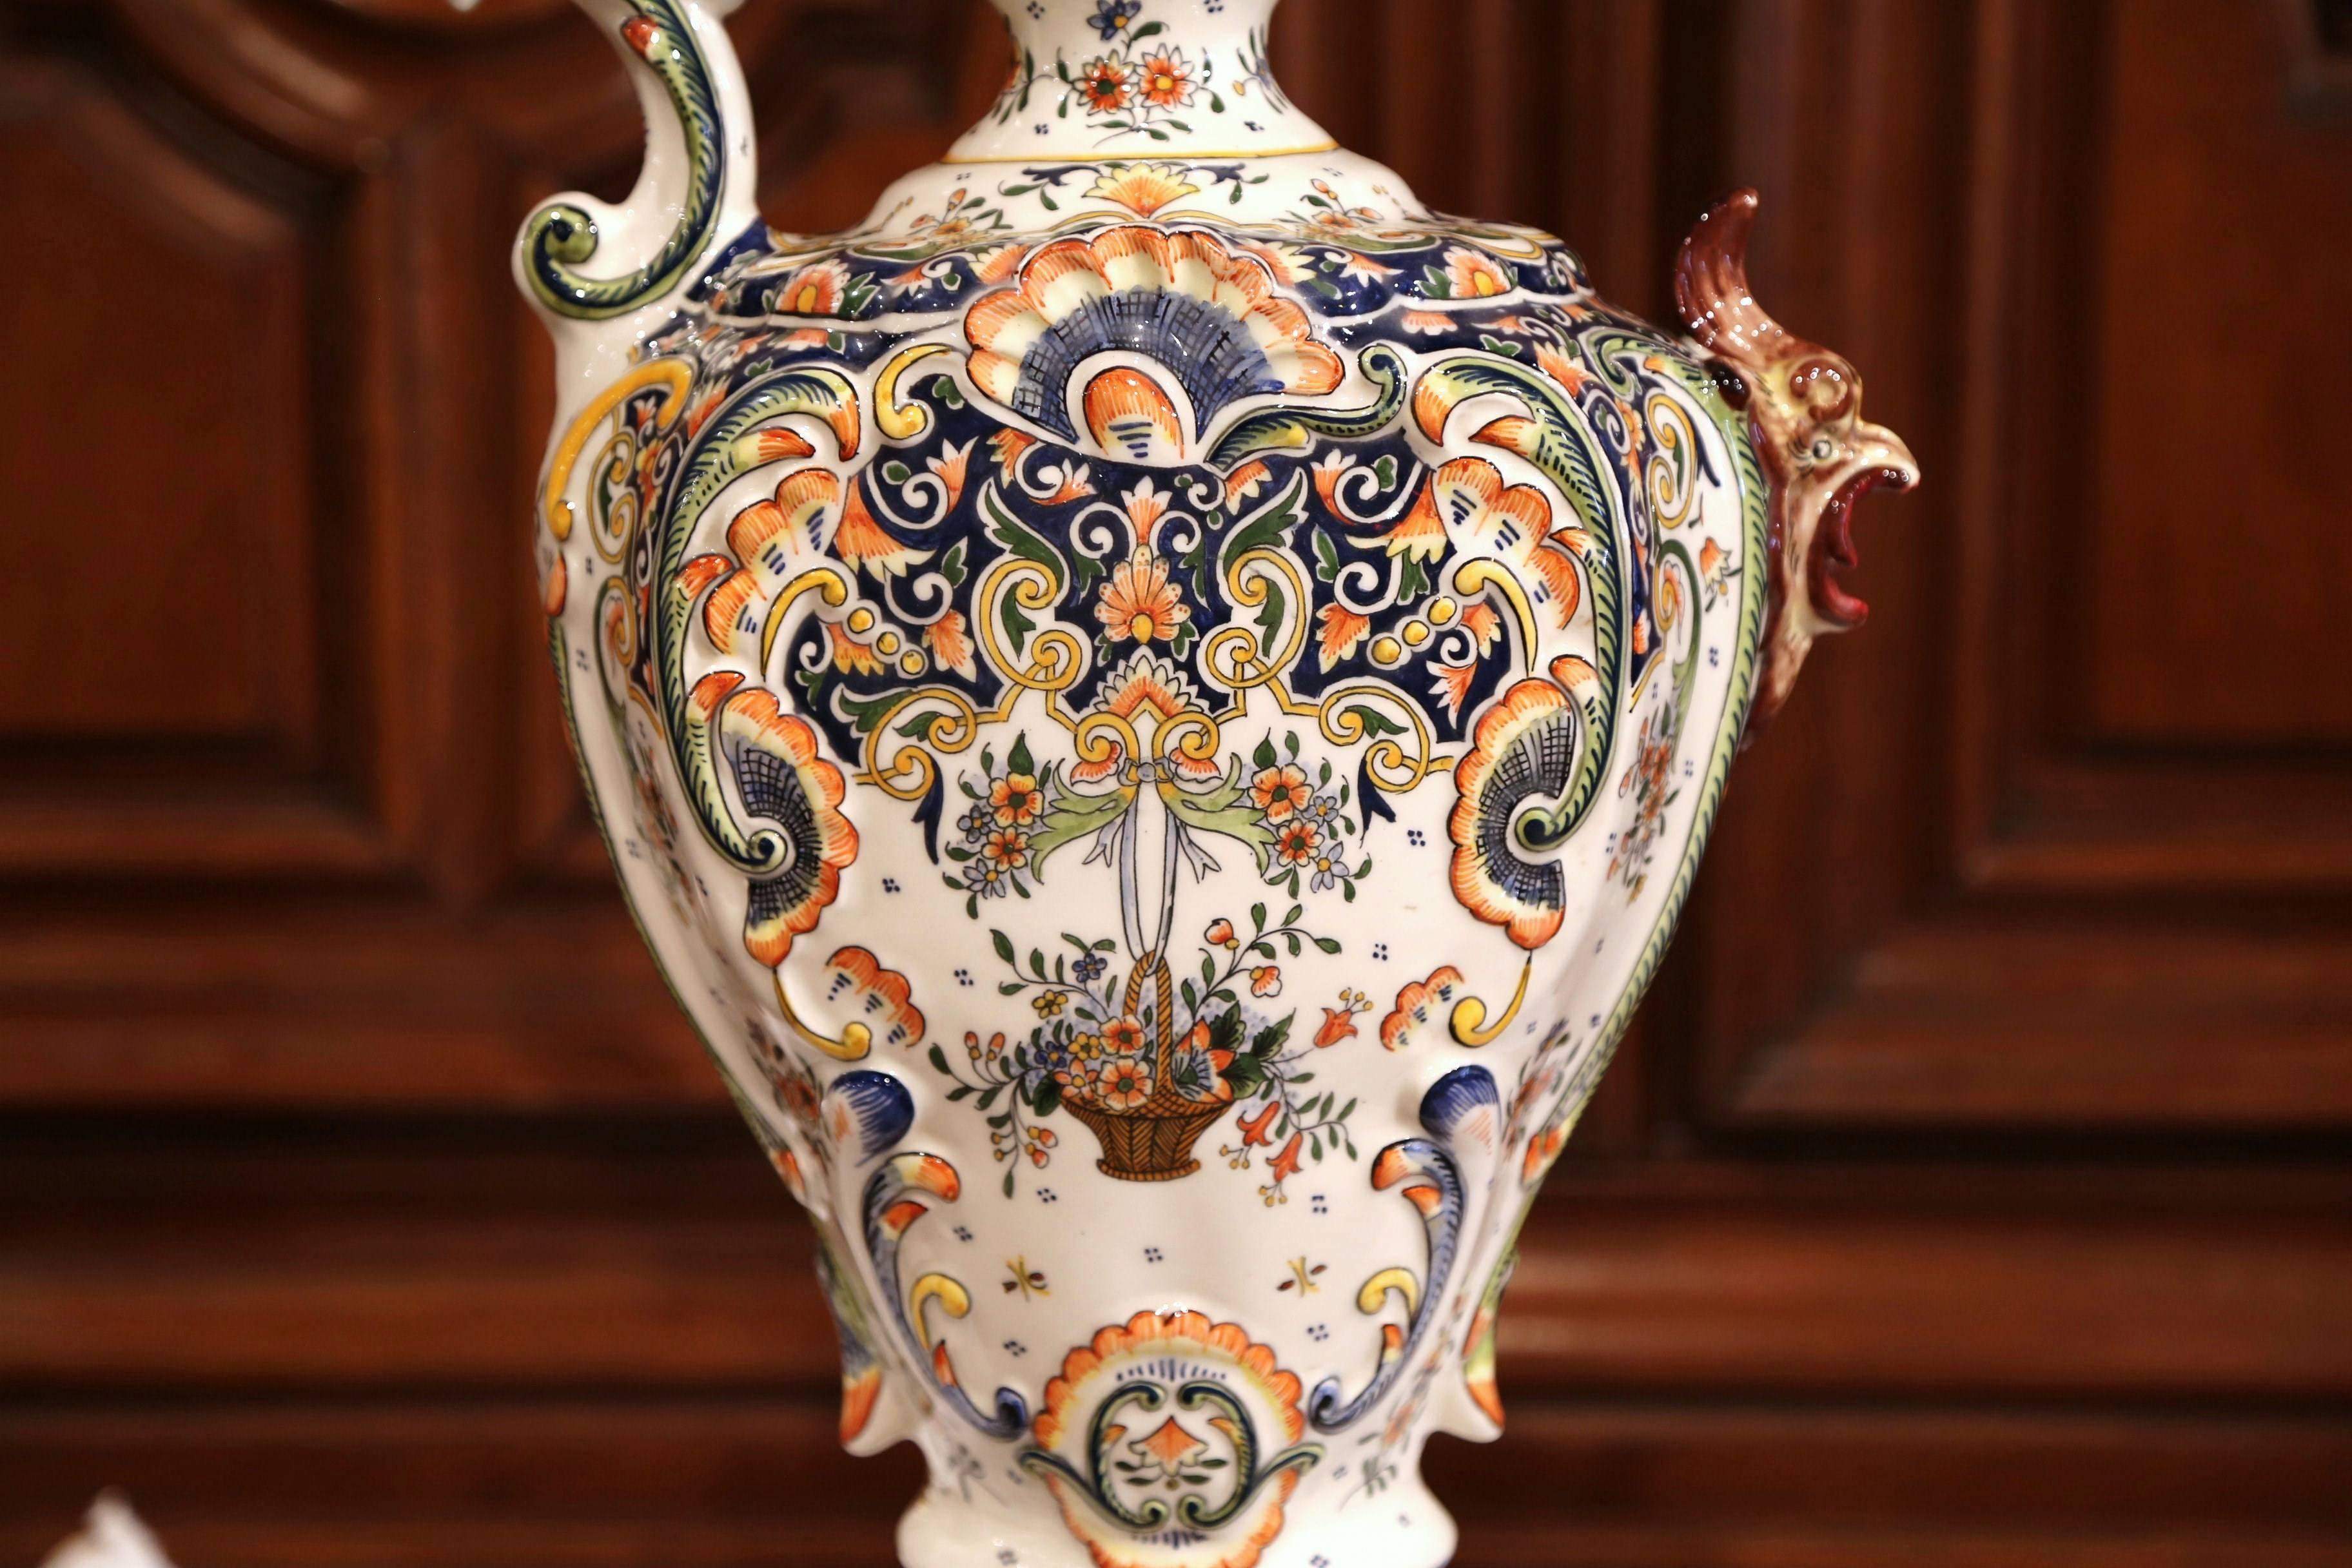 19th Century French Hand Painted Faience Ewer Vase from Boulogne In Excellent Condition For Sale In Dallas, TX